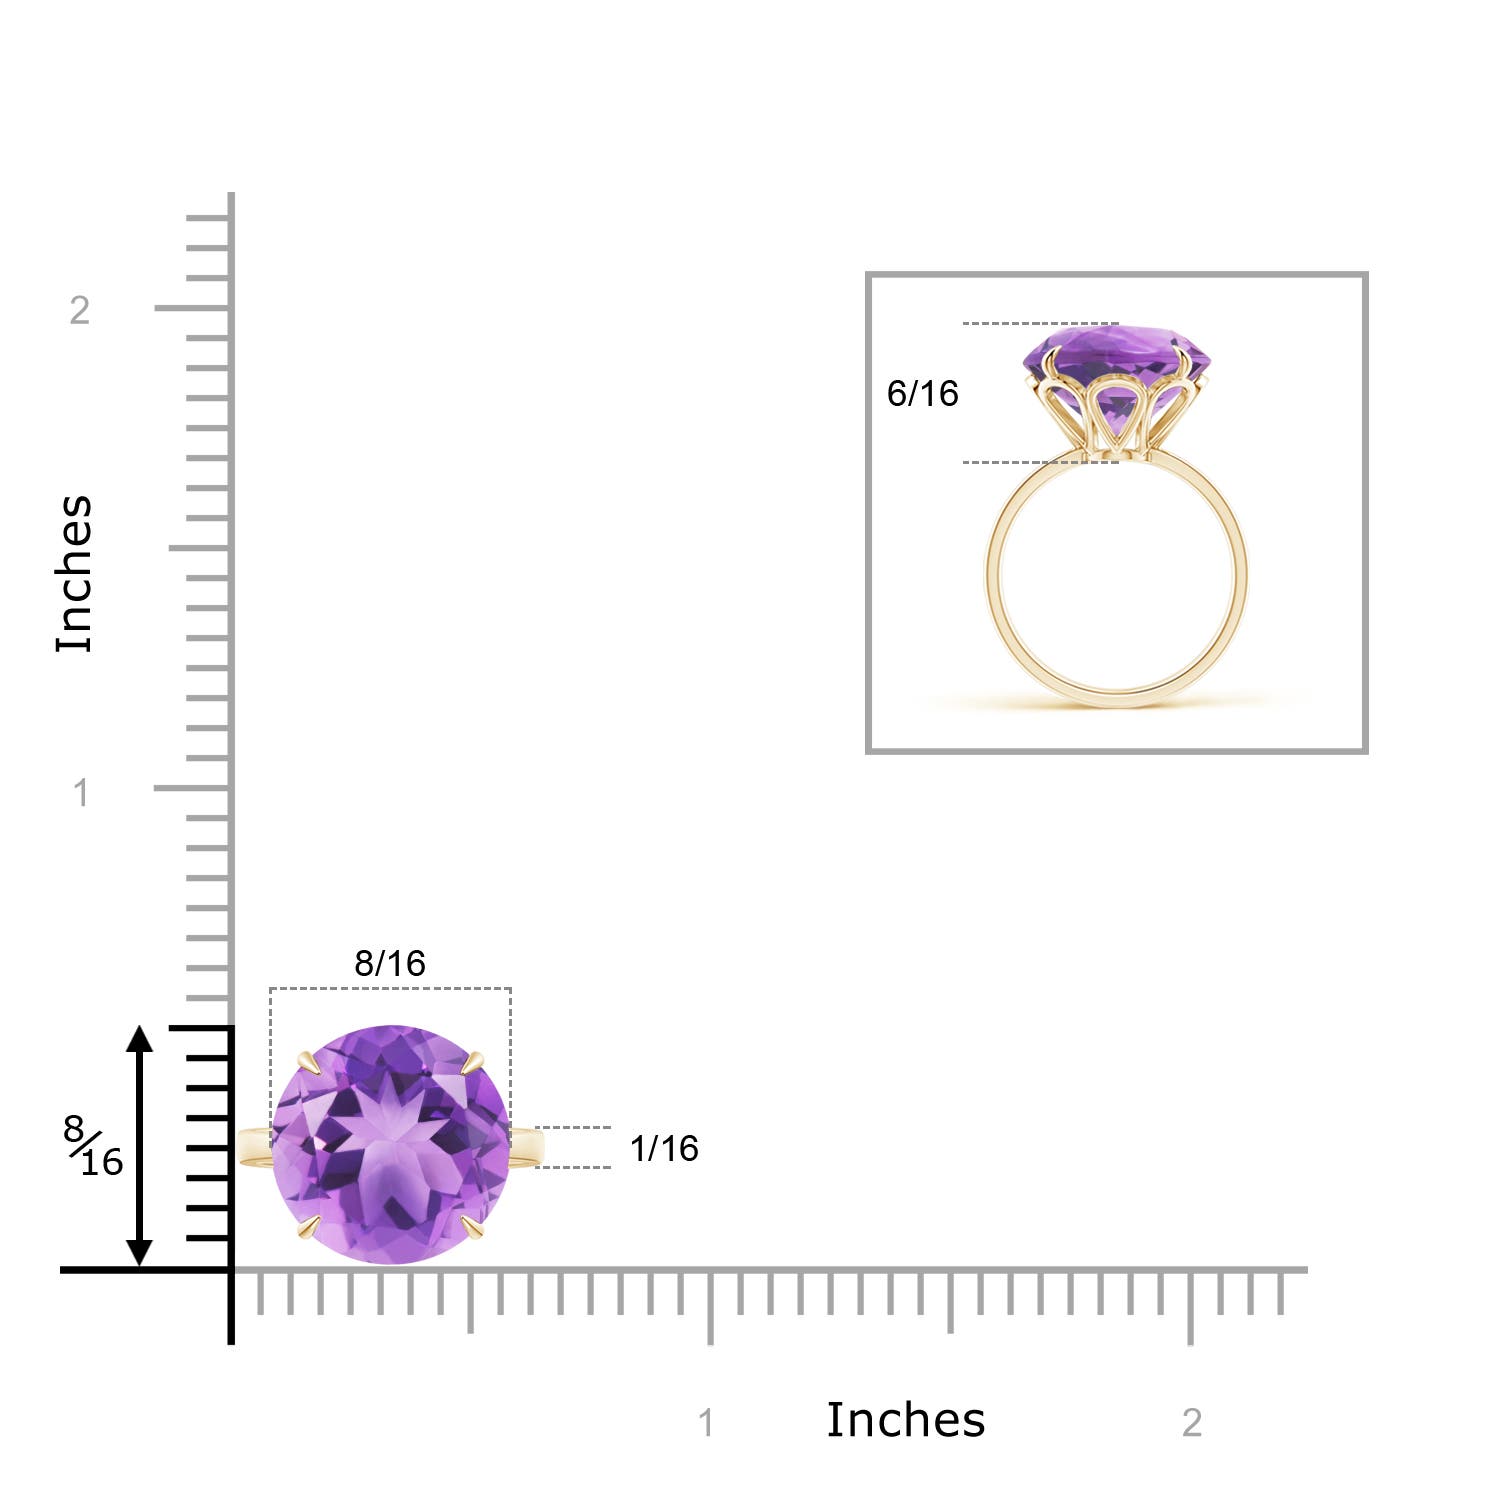 A - Amethyst / 7.2 CT / 14 KT Yellow Gold